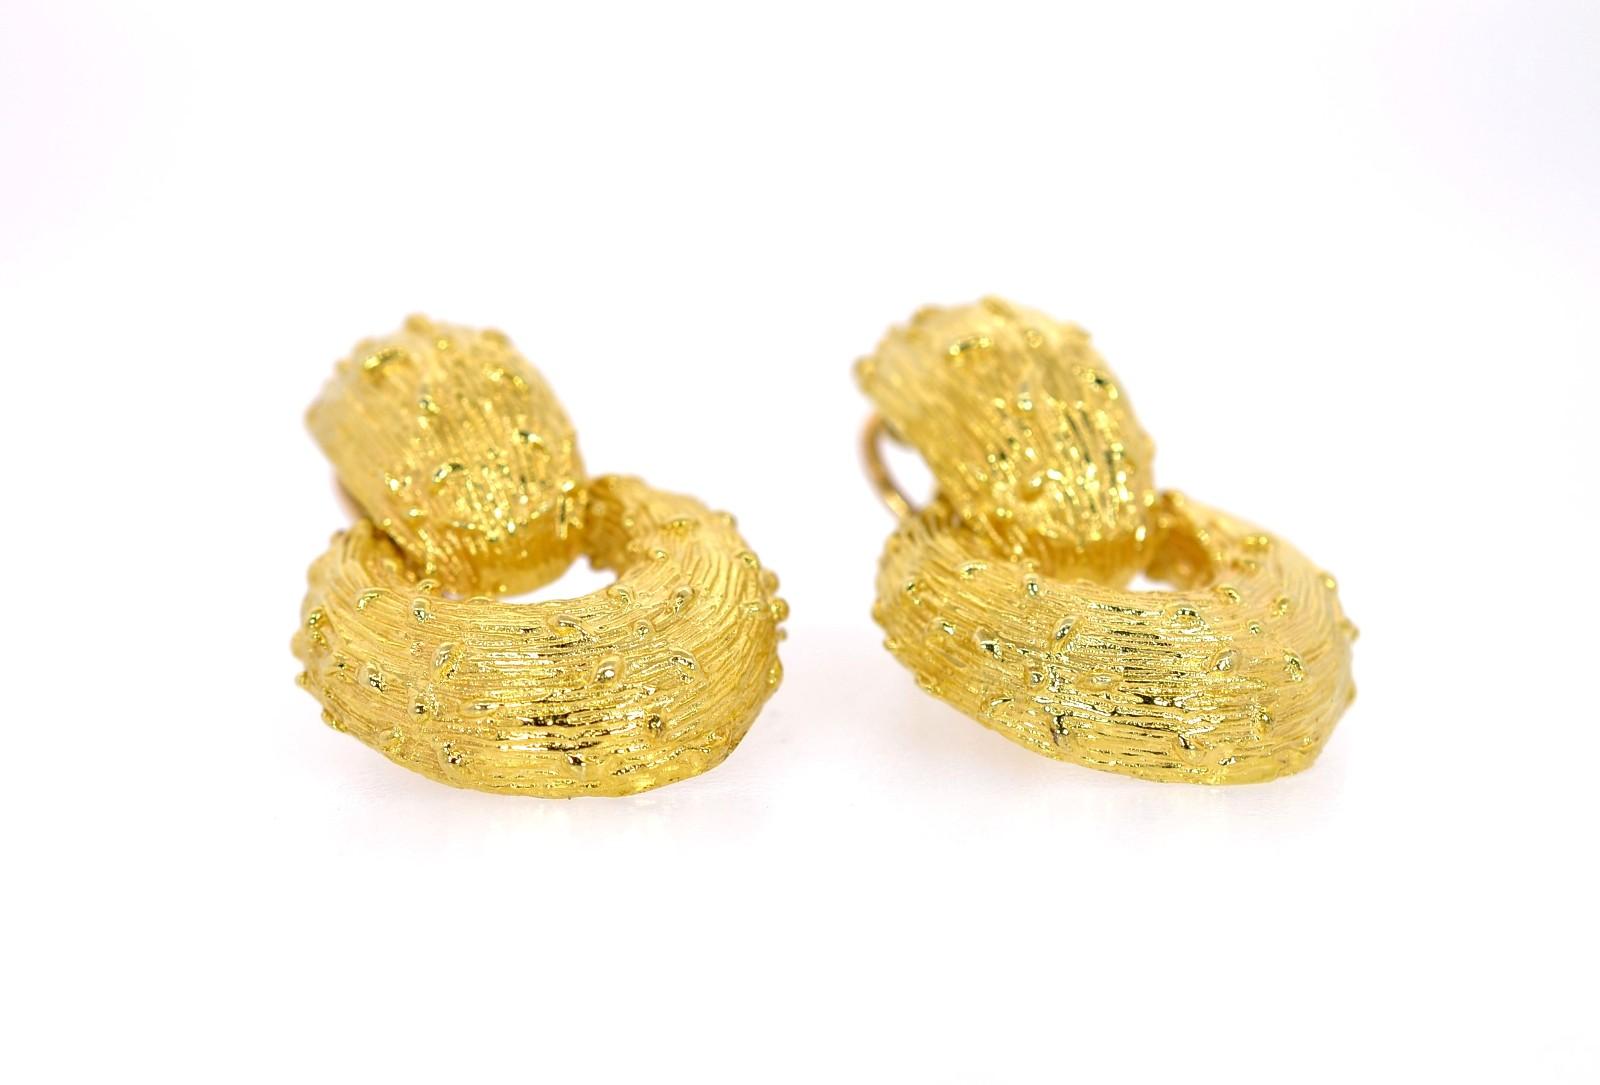 Crafted of 14K yellow gold, these 1960s-era earrings are designed as 